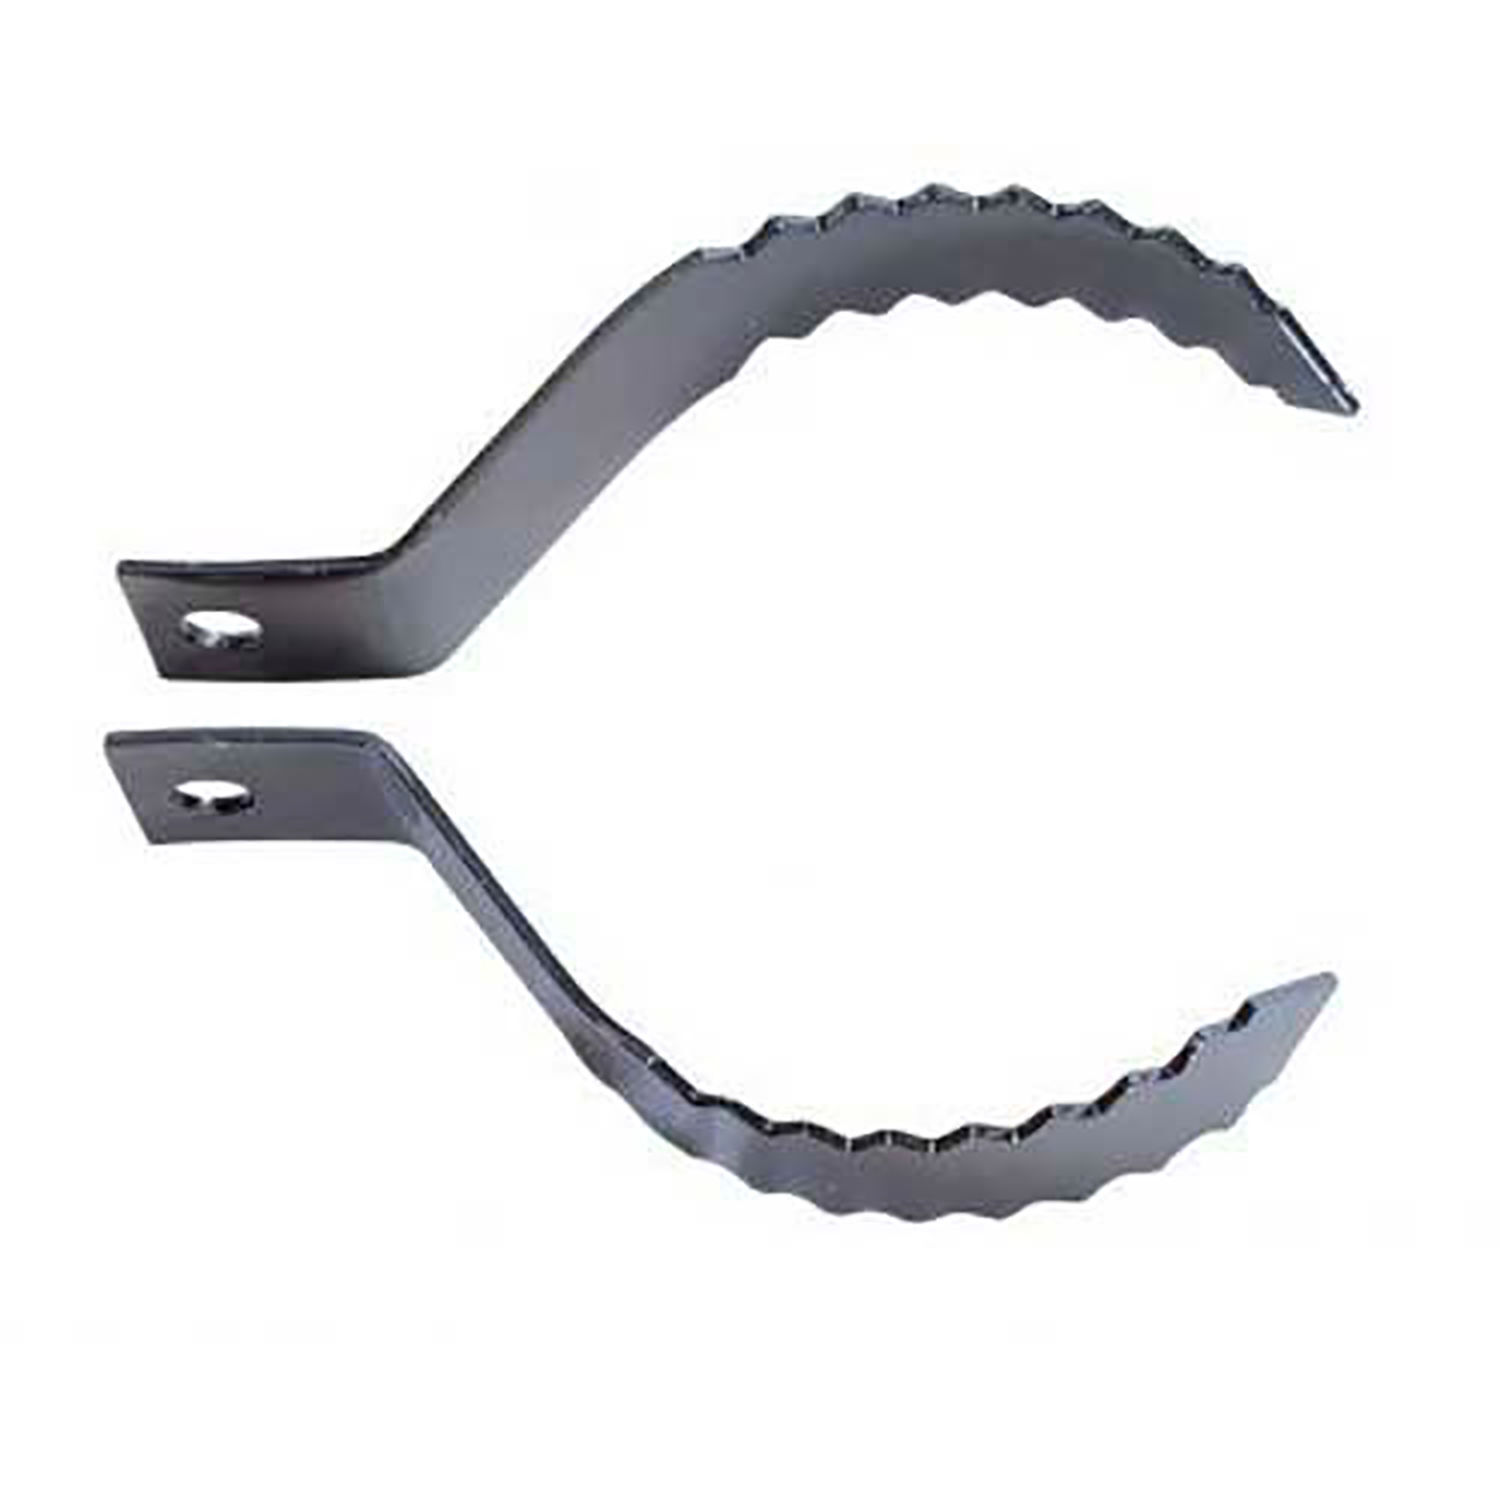 General Wire 4SCB General Wire 4" Side Cutter Blade4SCB - $46.99